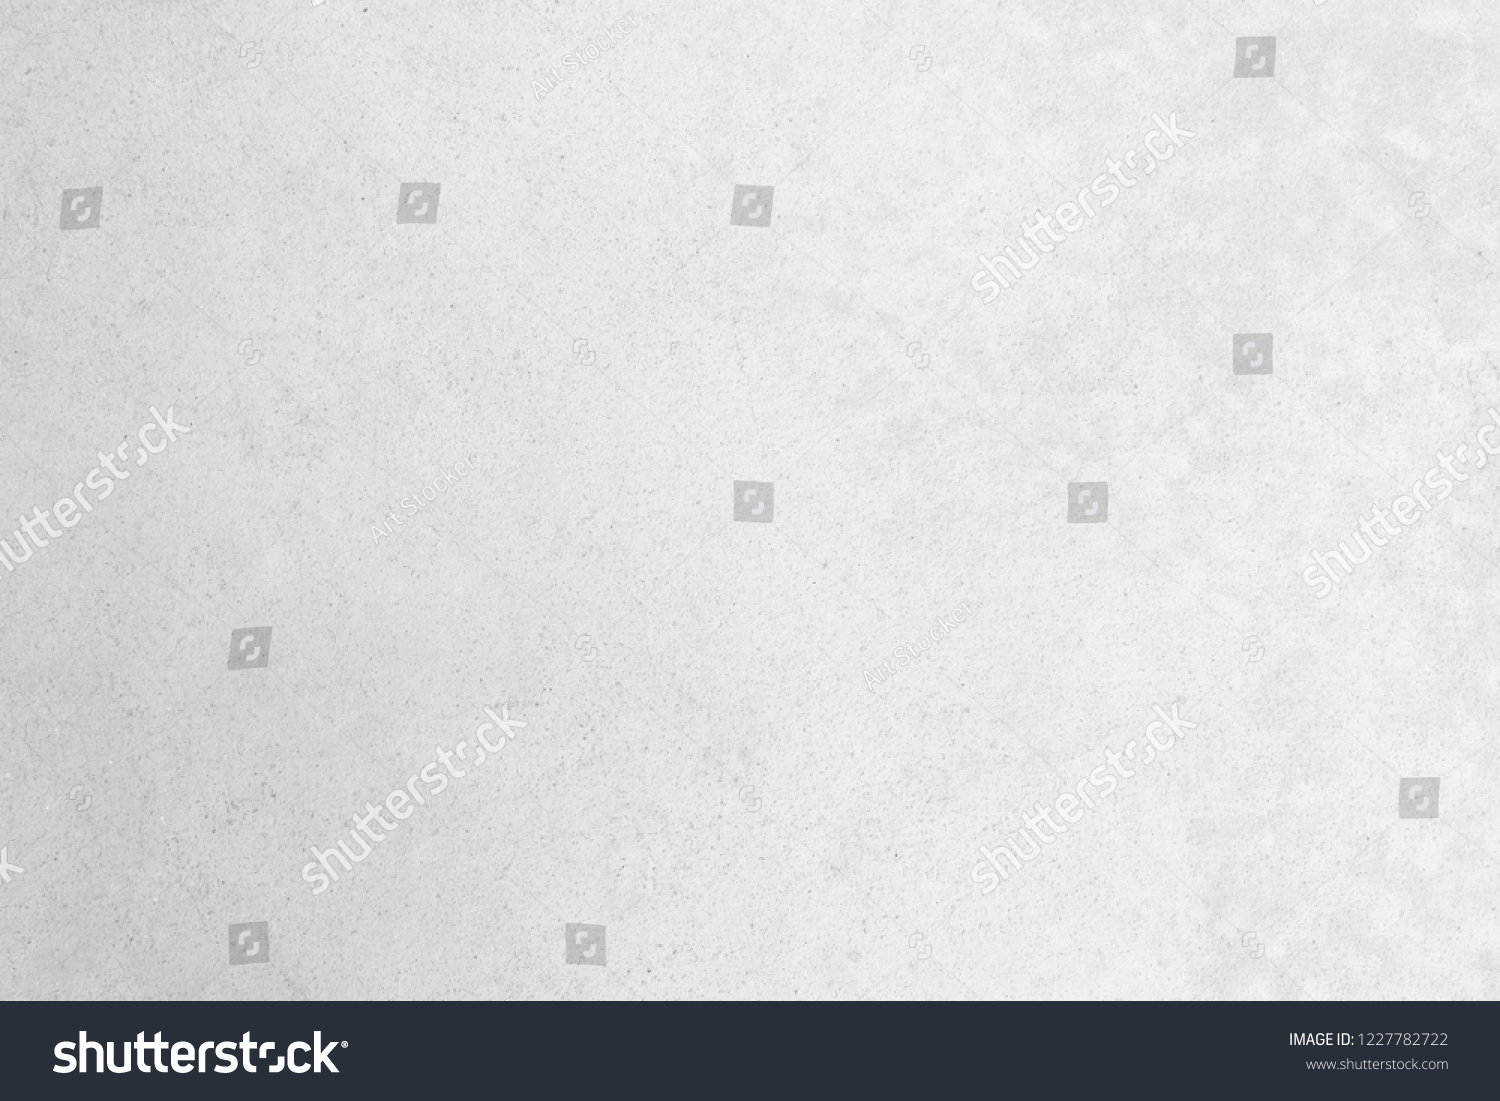 Grey limestone texture background in white light polished empty wall paper. luxury gray concrete stone table top desk tabl top view textur grunge seamless marble, cement floor surface bacground smooth #1227782722